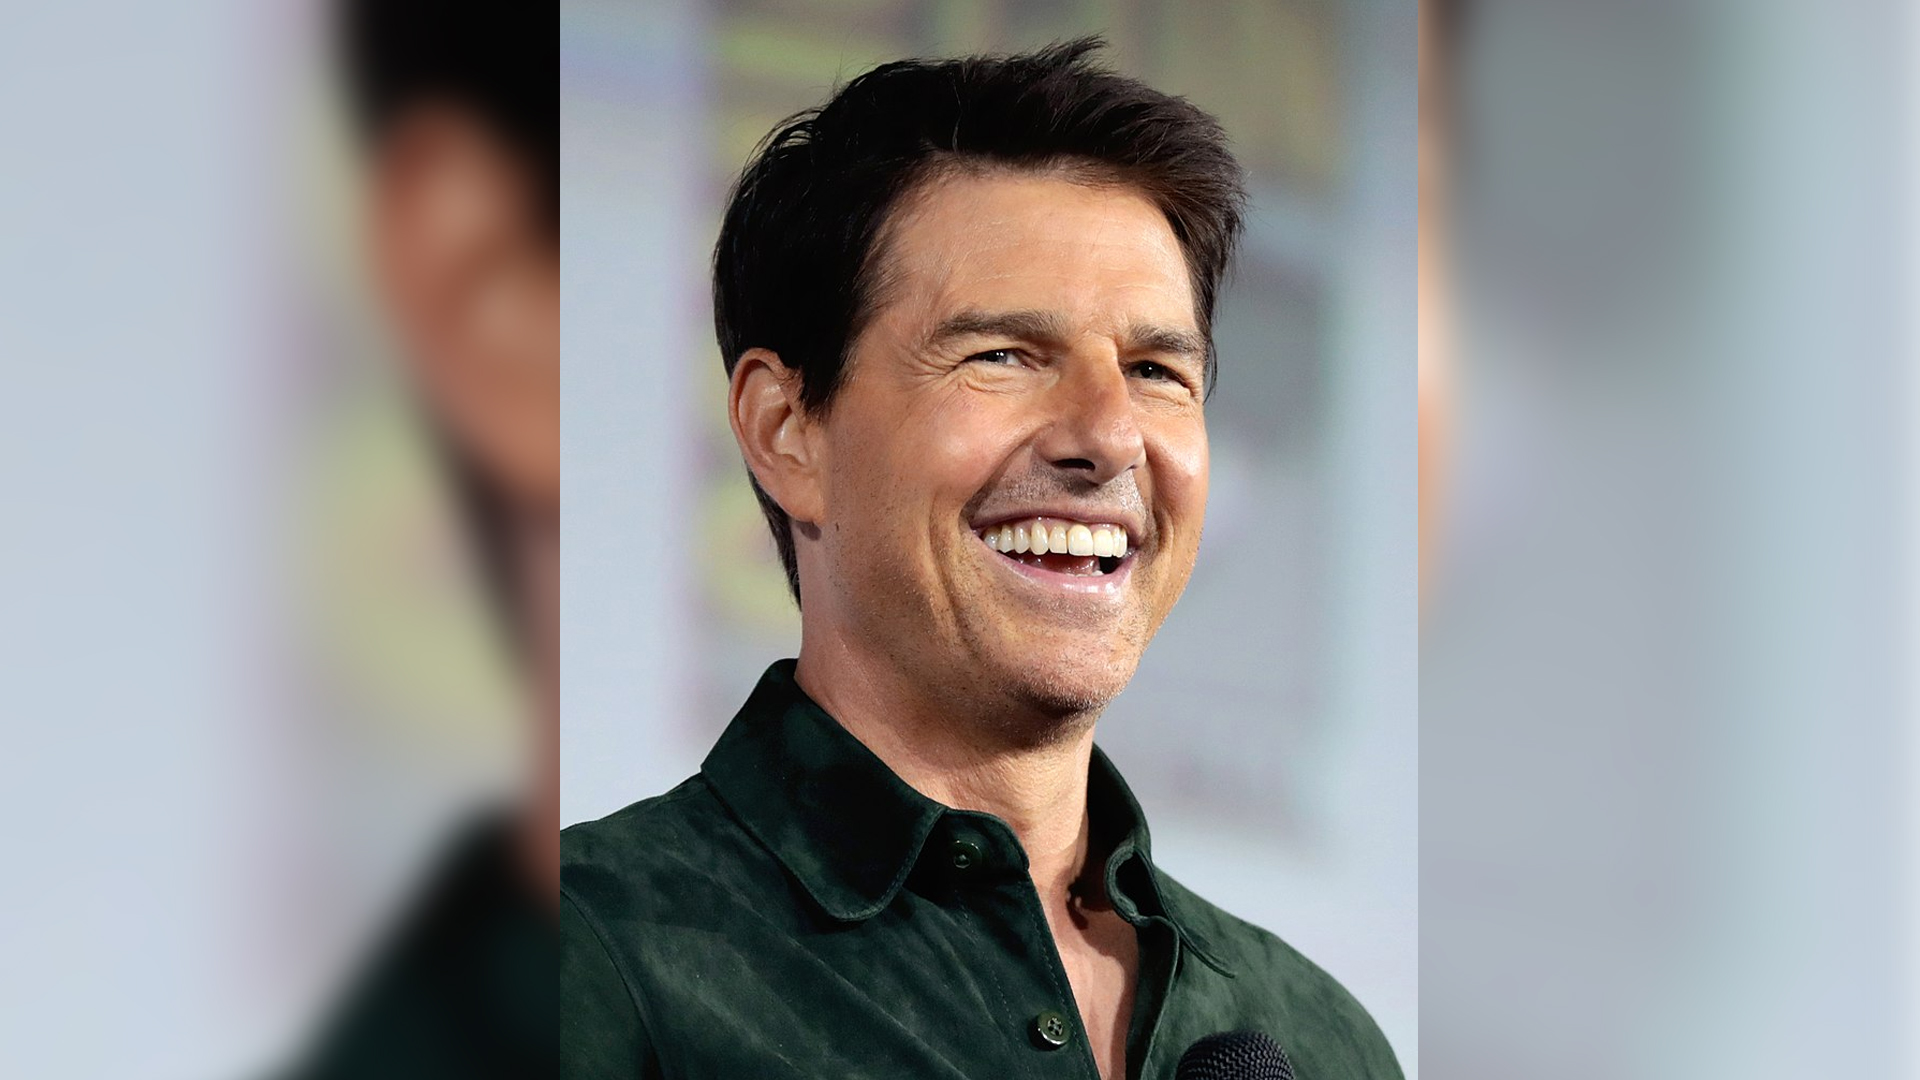 Top Gun 3' In Works at Paramount, Though Tom Cruise Inked Warner Deal